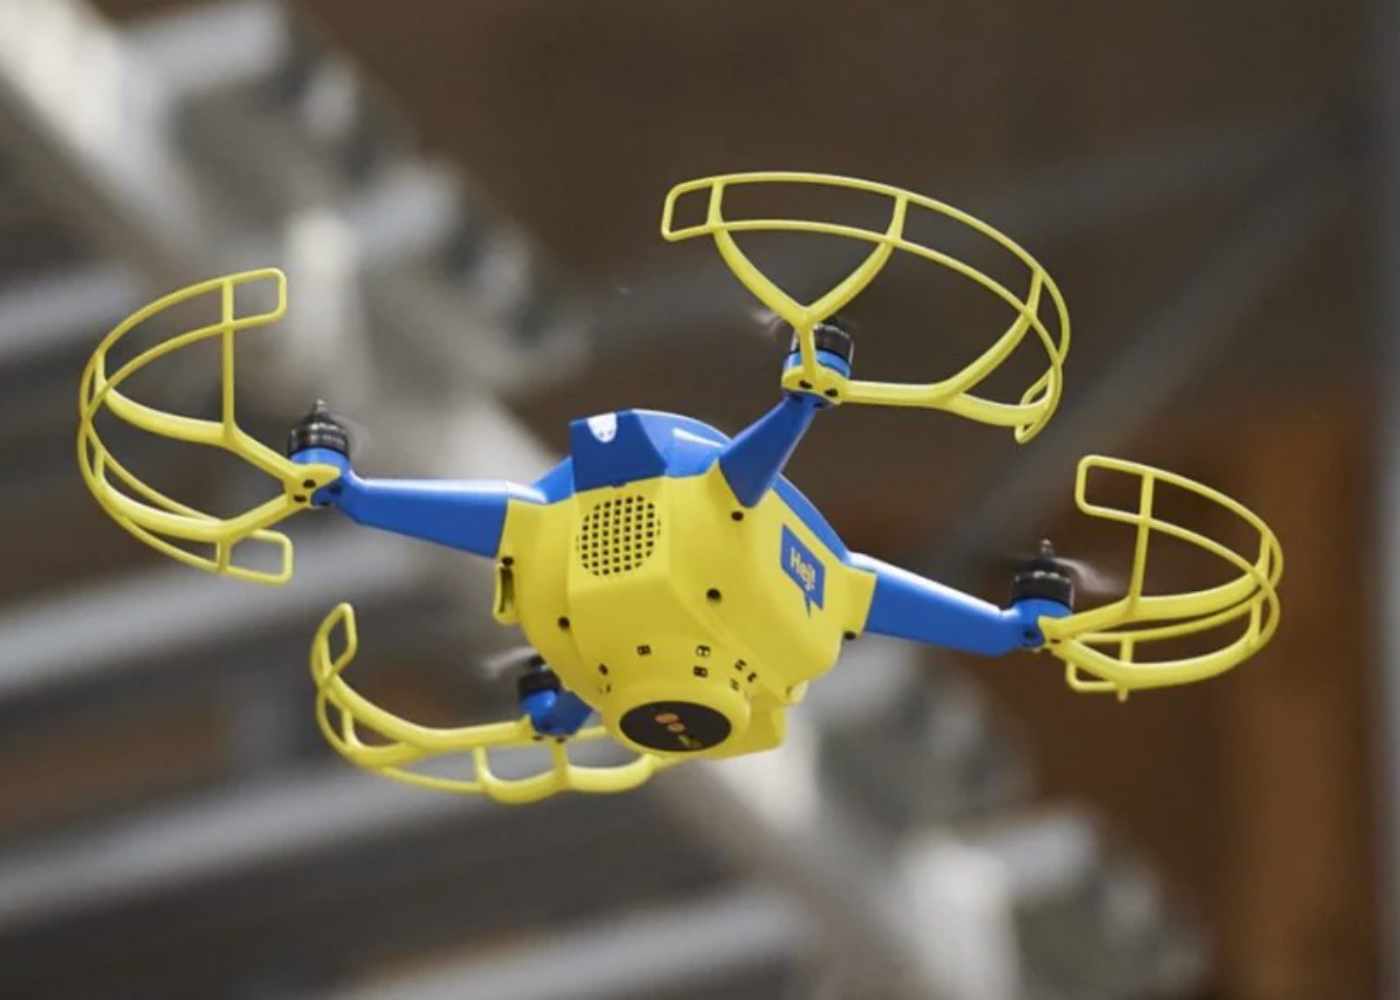 VIDEO Ikea deploys drones for stock inventory